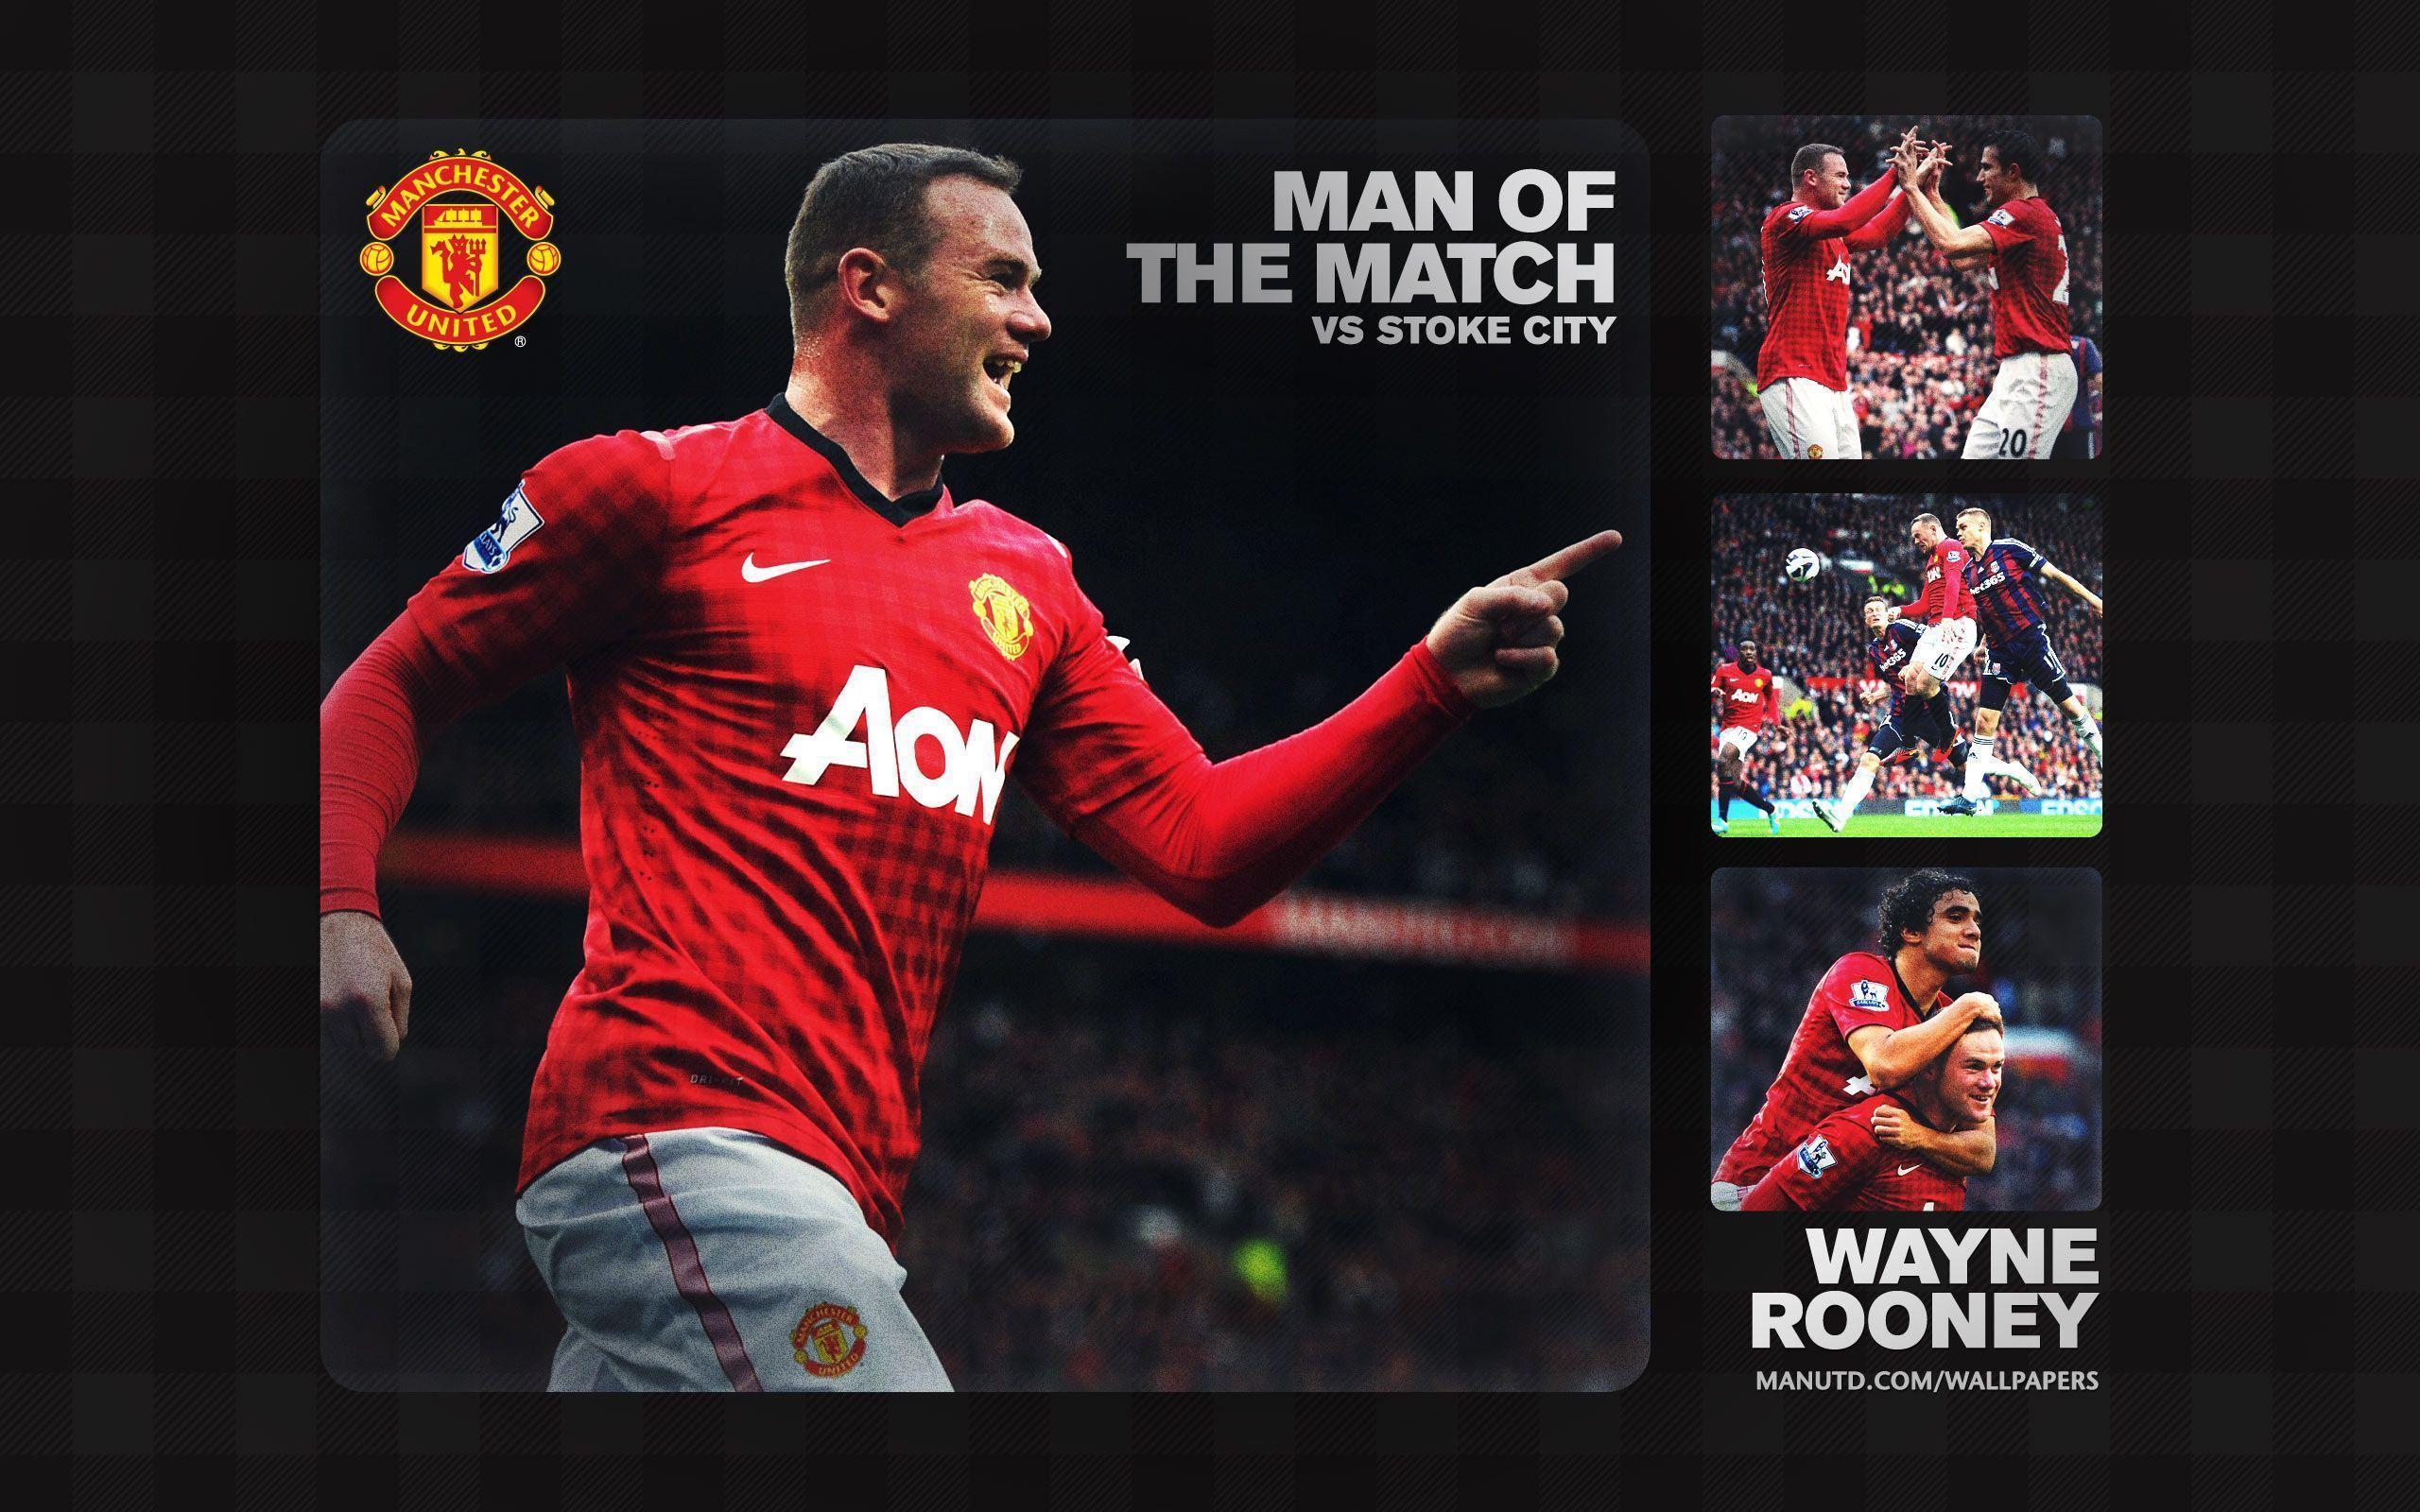 Wayne Rooney Manchester United 2013 HD Wallpaper and Picture